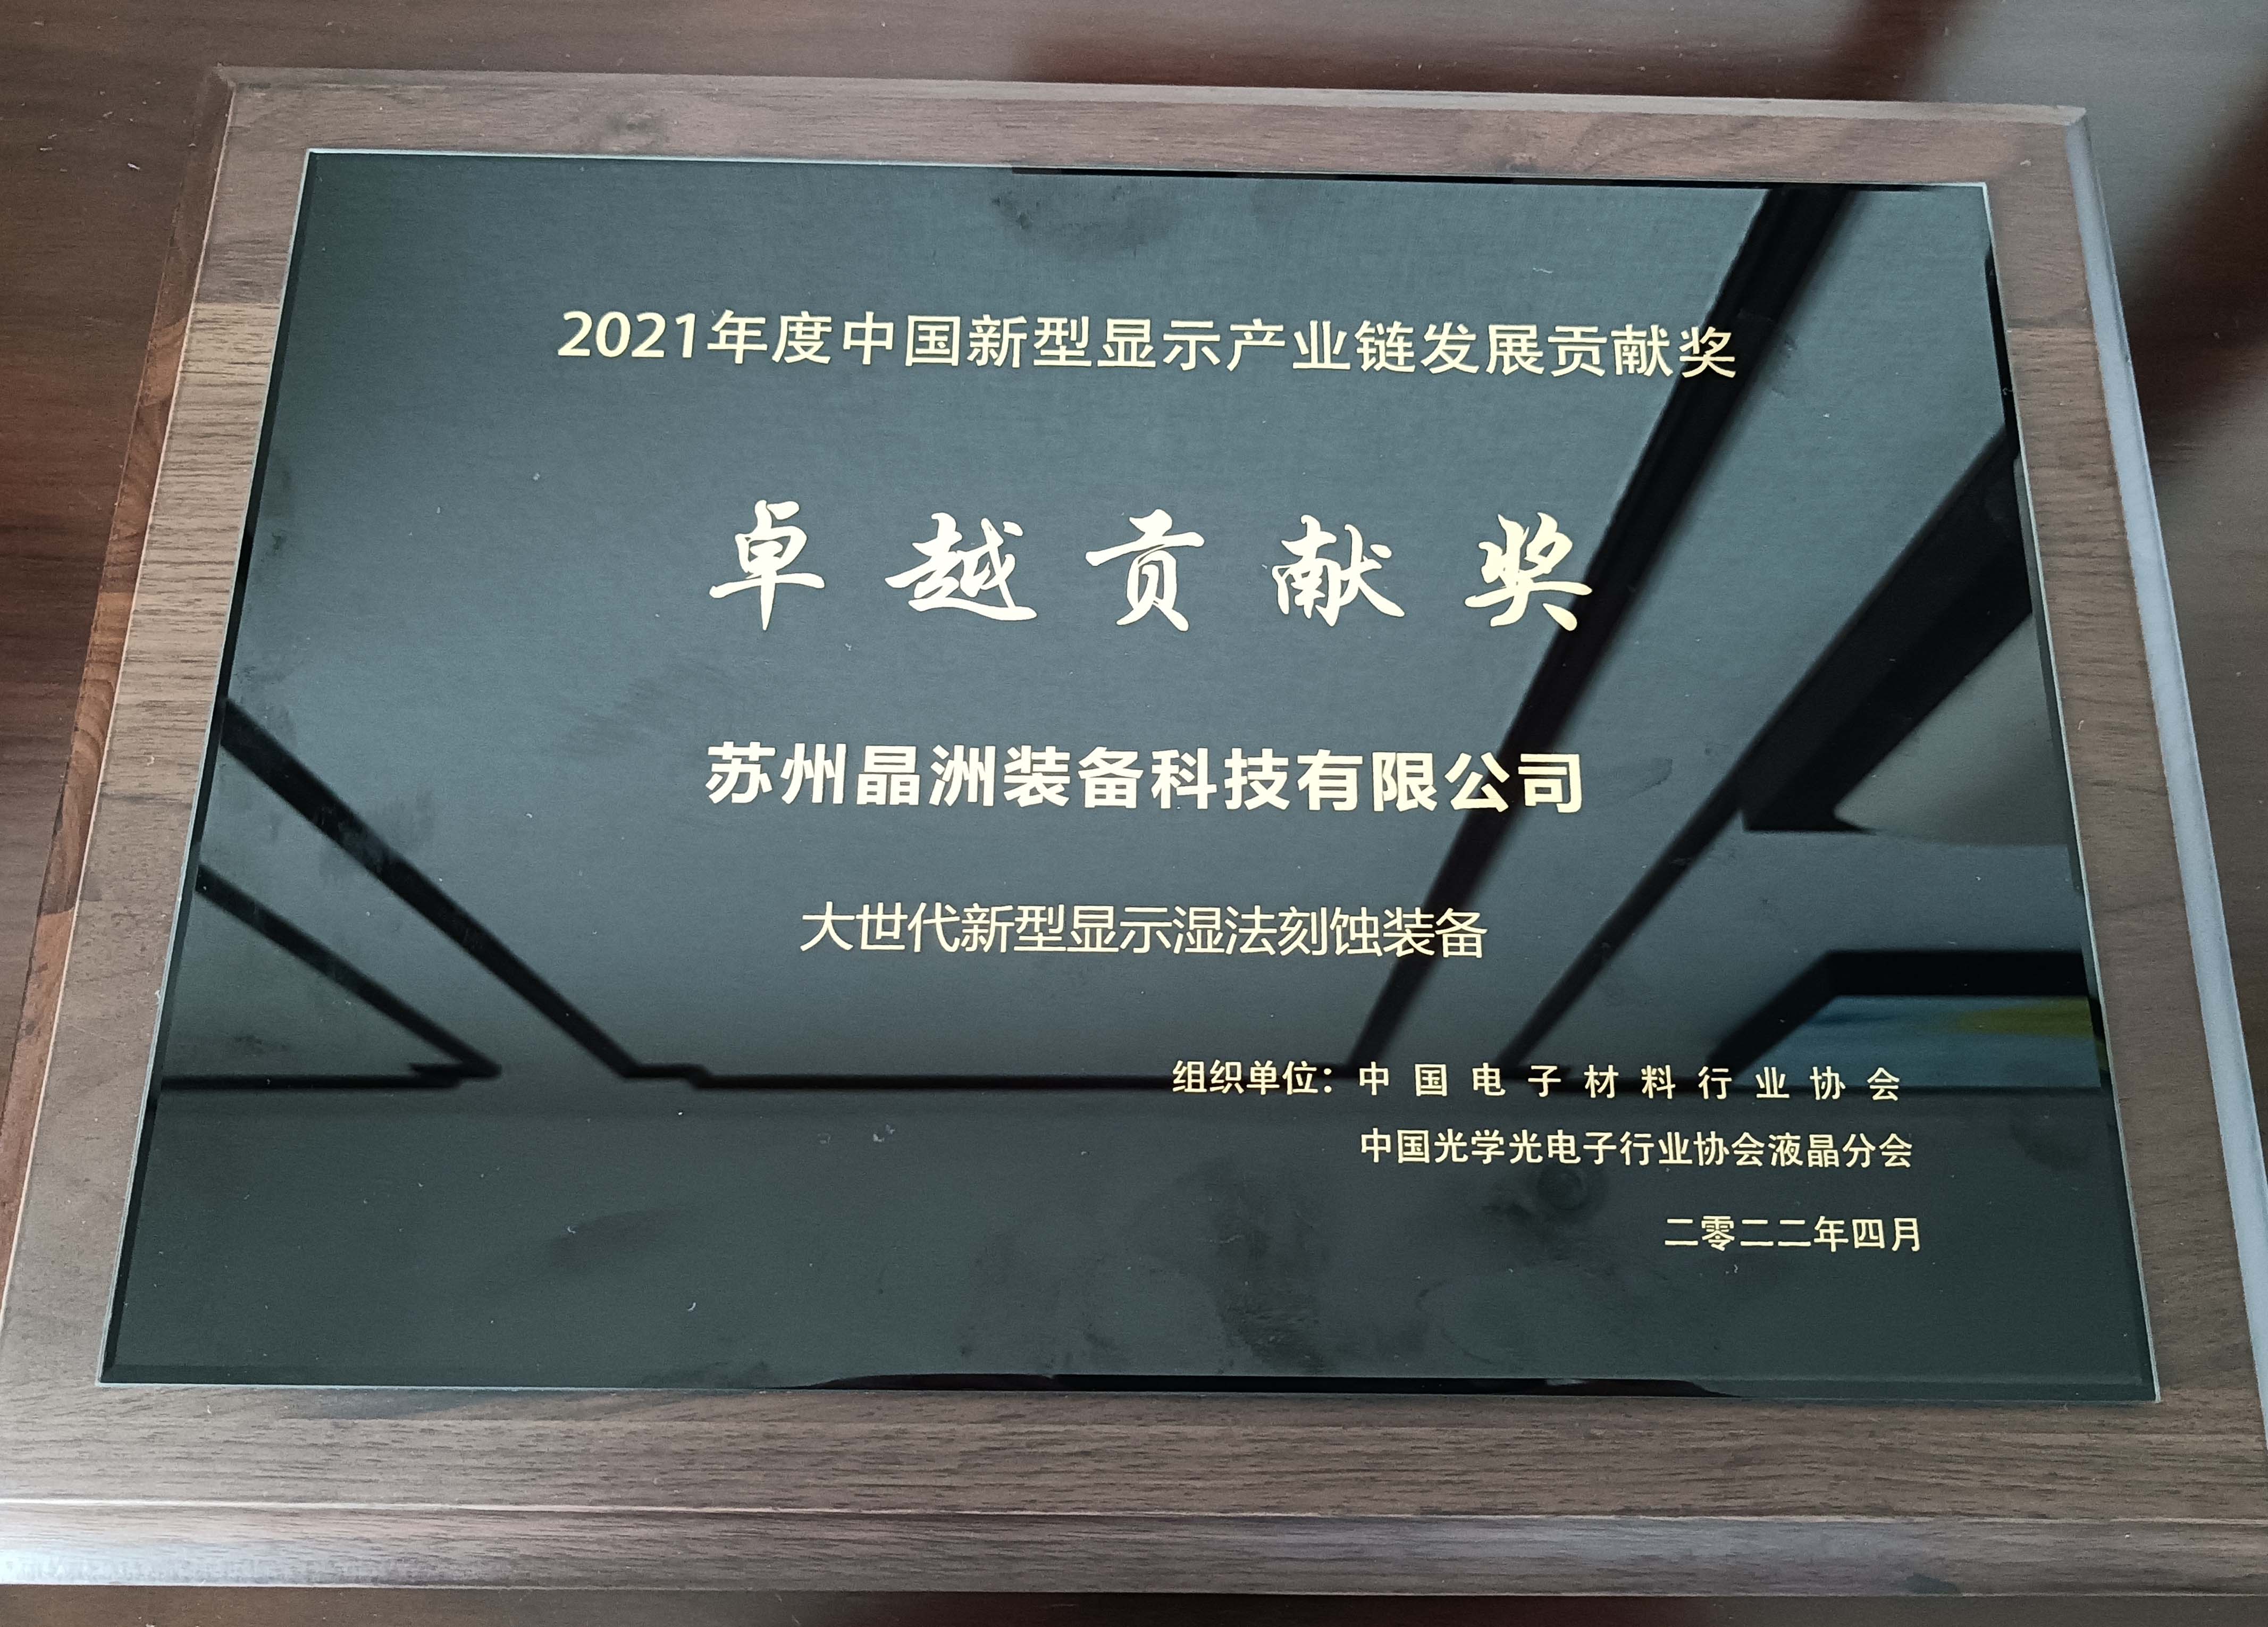 Kzone Equipment won the 2021 China New Display Industry Chain Outstanding Contribution Award and delivered a keynote speech